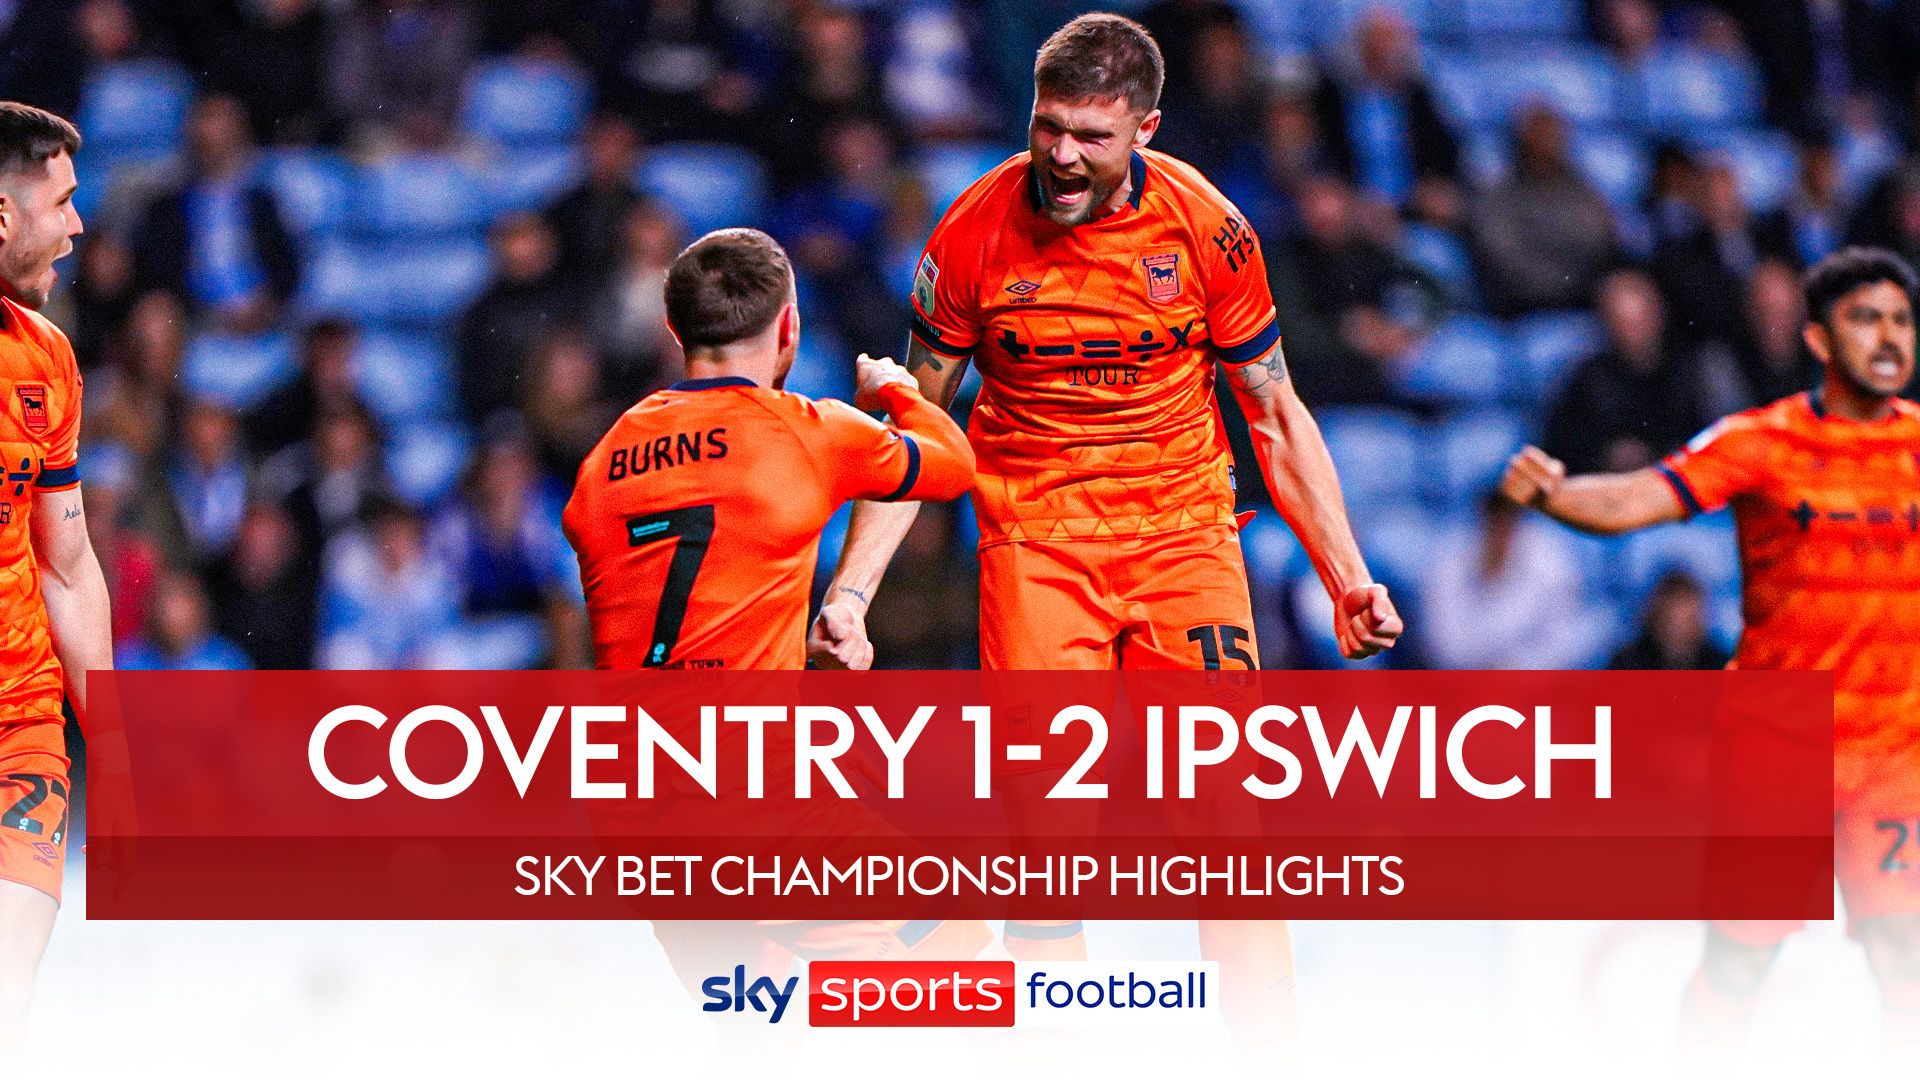 On the verge of the PL... Ipswich's crucial win at Coventry